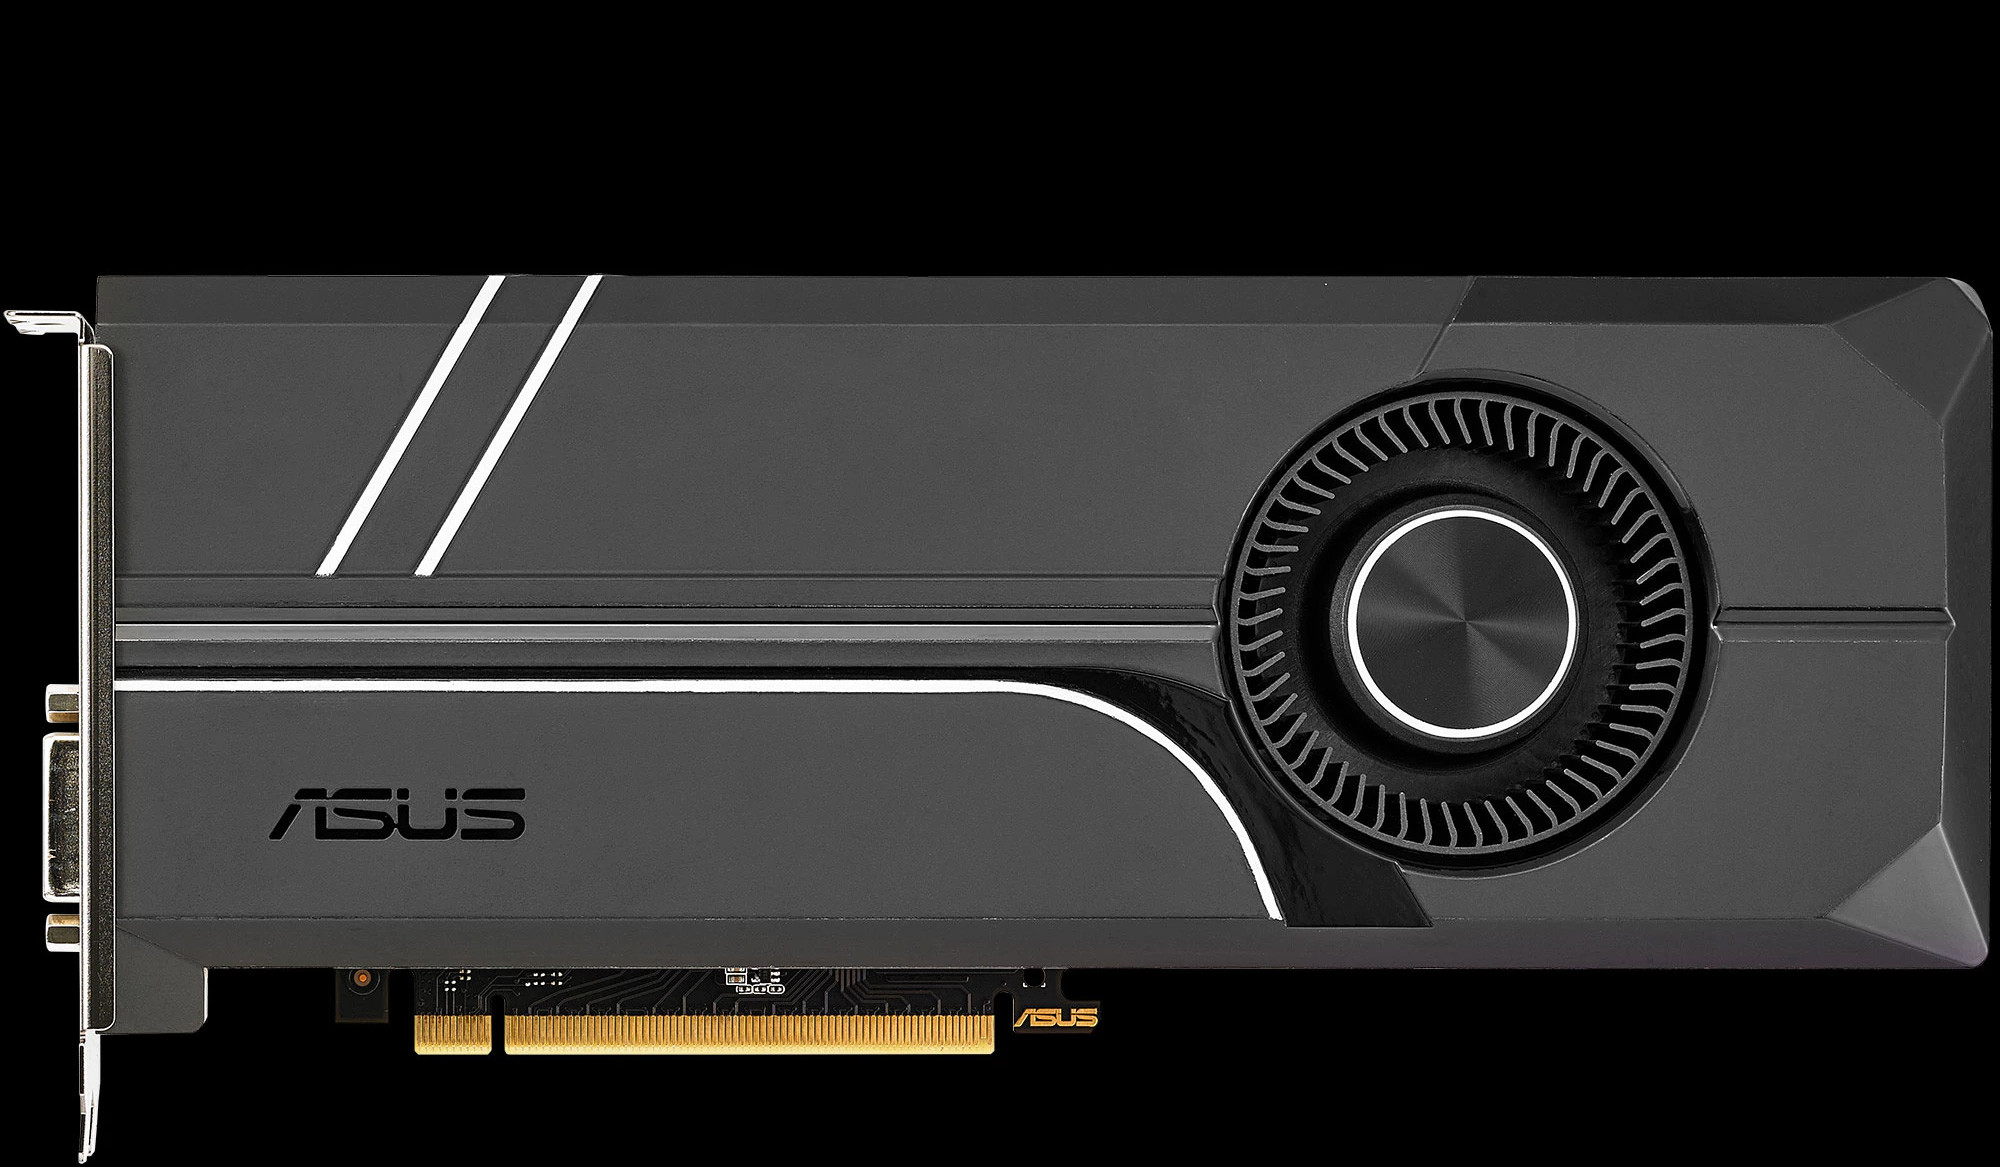 ASUS Announces its ROG Strix and Turbo GeForce GTX 1070 Ti Graphics ...